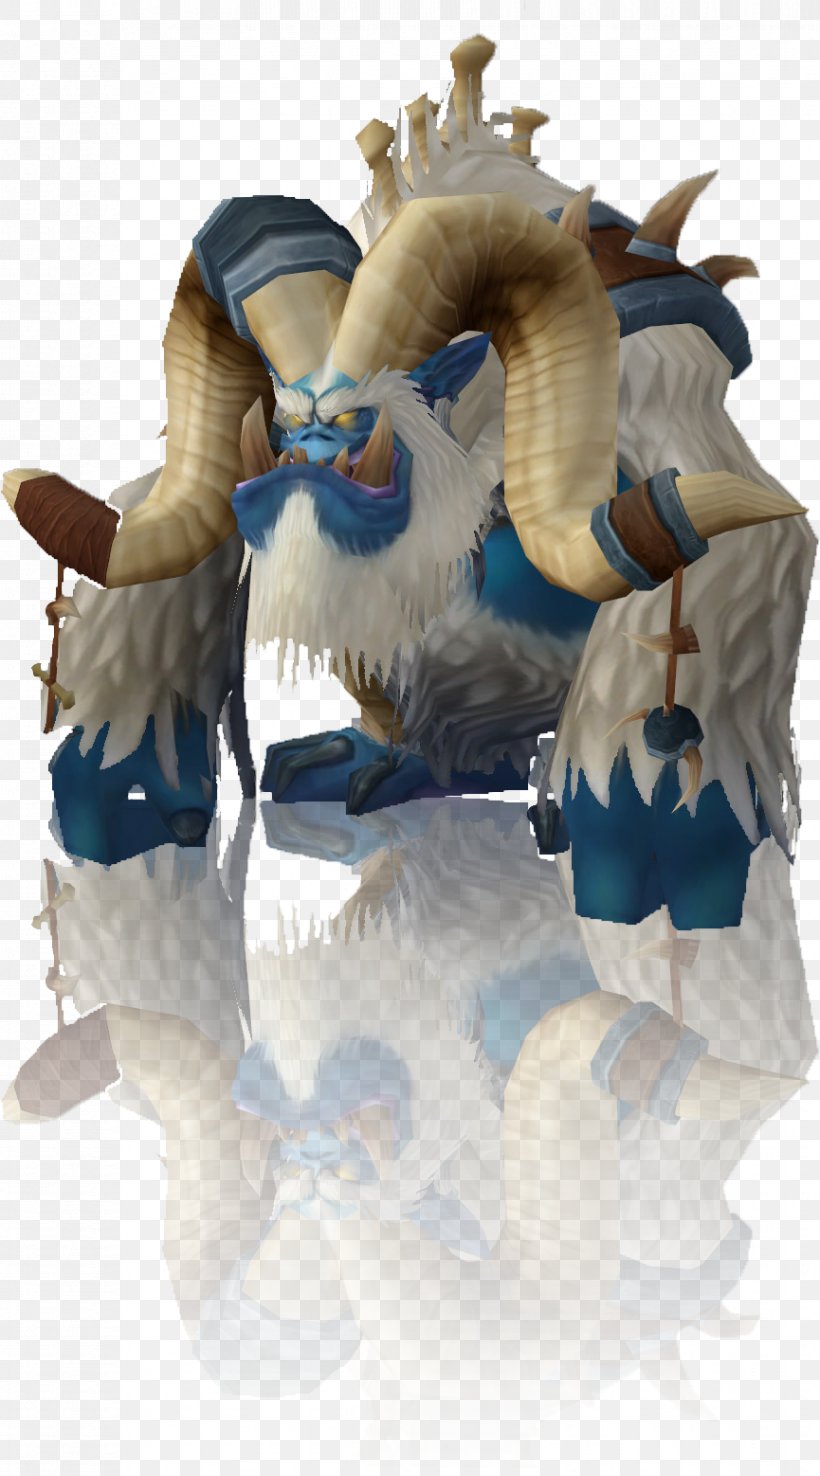 World Of Warcraft: Wrath Of The Lich King Anub'arak Figurine Email, PNG, 865x1558px, Figurine, Email, Reflex, Warcraft, World Of Warcraft Download Free